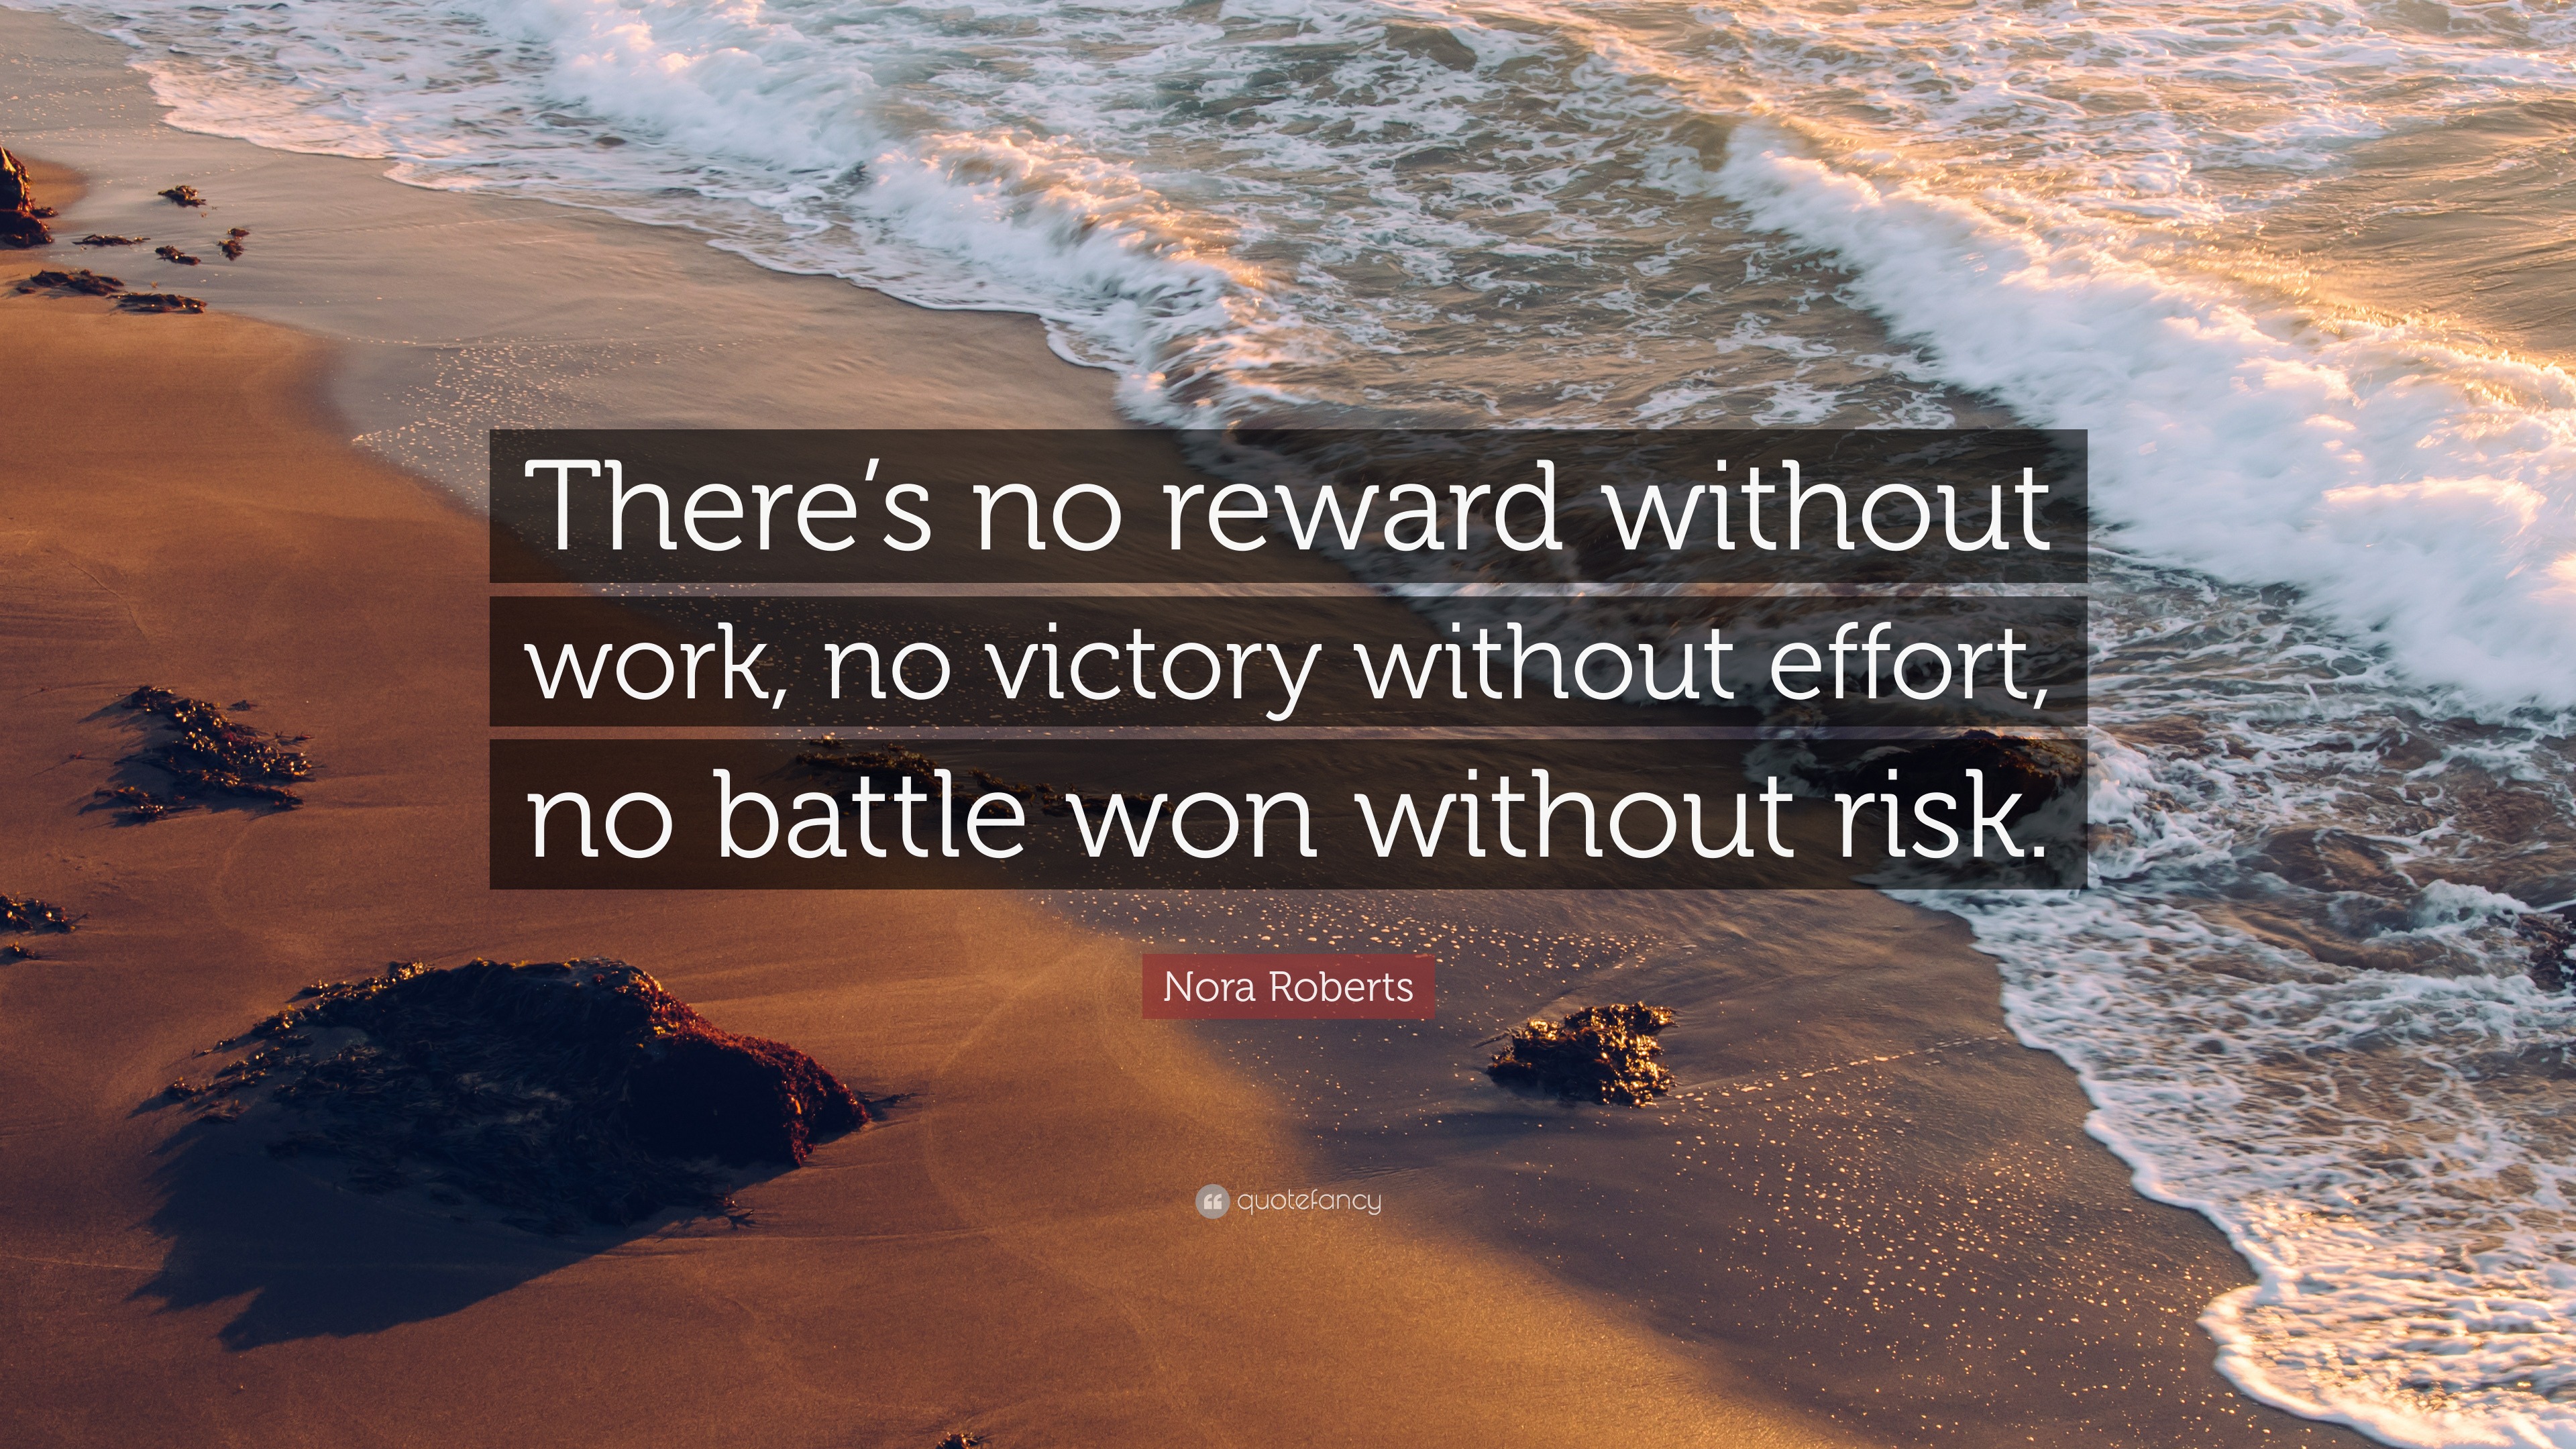 Nora Roberts Quote: “There’s no reward without work, no victory without